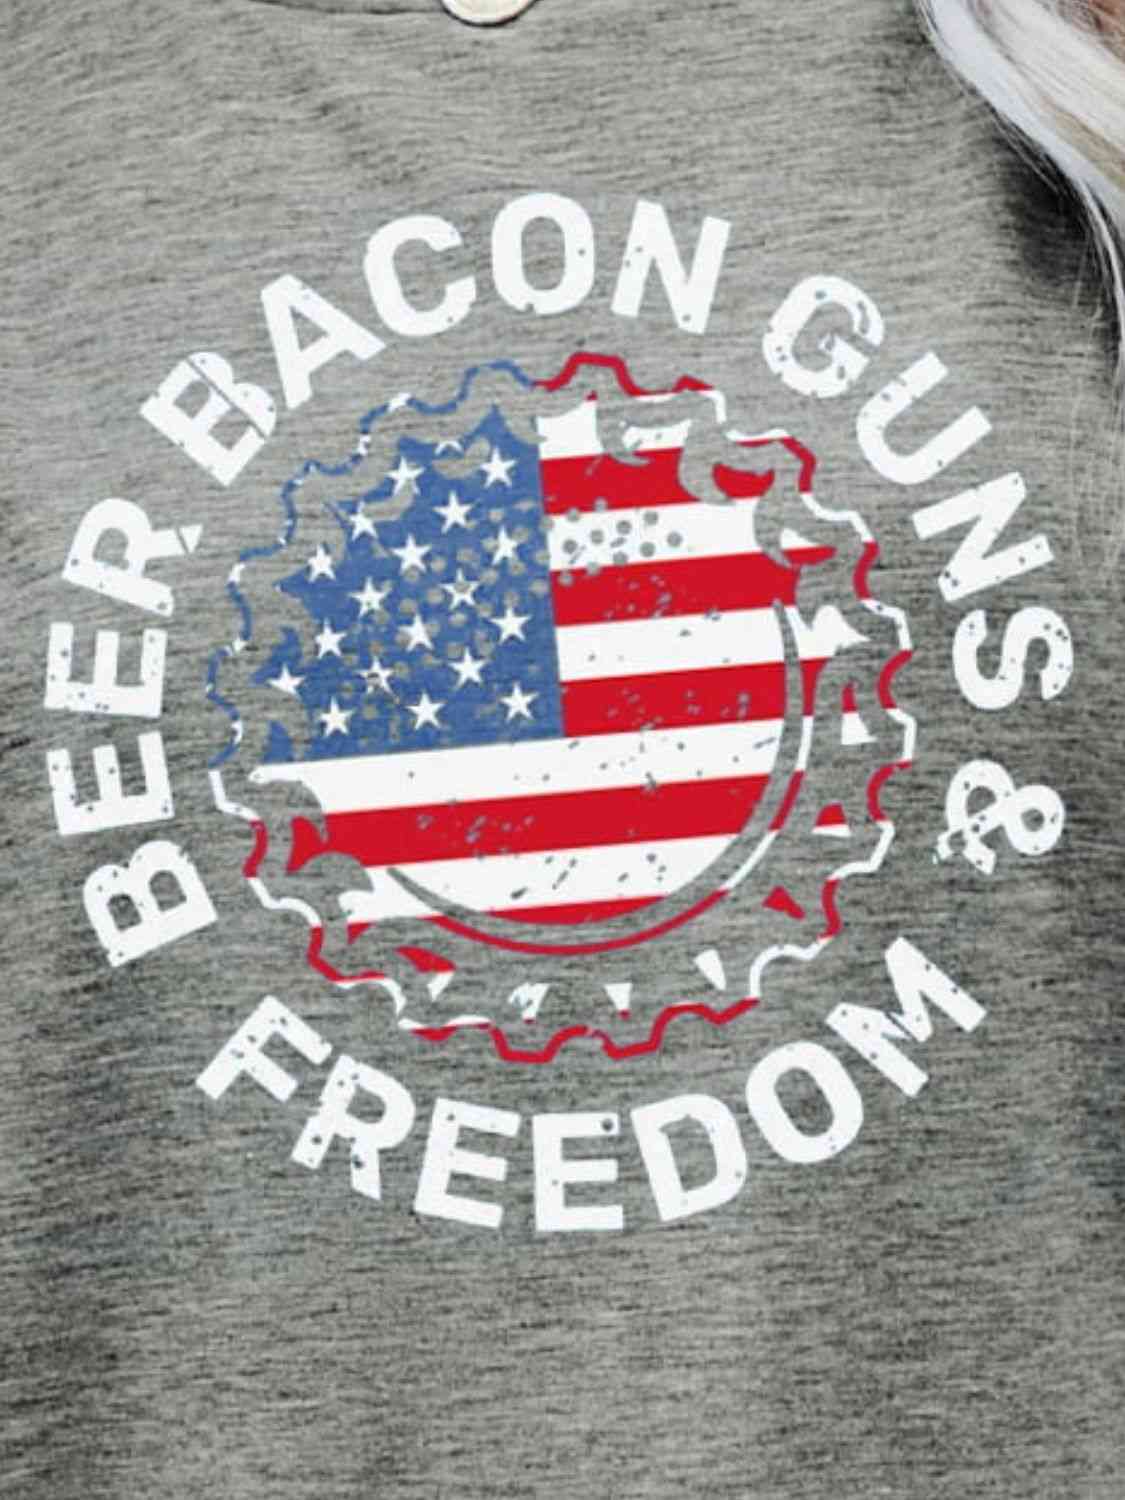 BEER BACON GUNS & FREEDOM US Flag Graphic Tee   